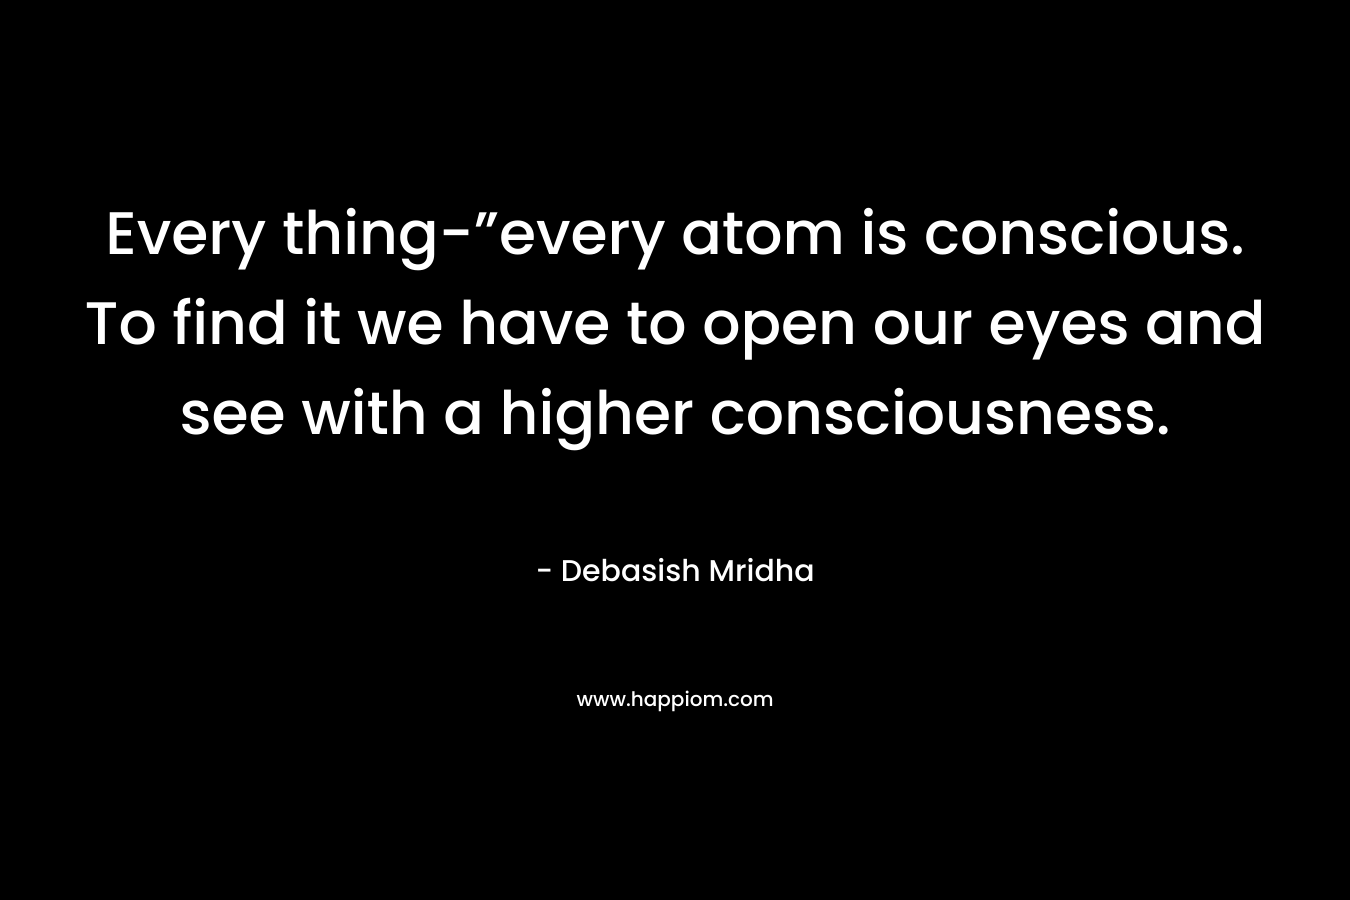 Every thing-”every atom is conscious. To find it we have to open our eyes and see with a higher consciousness. – Debasish Mridha